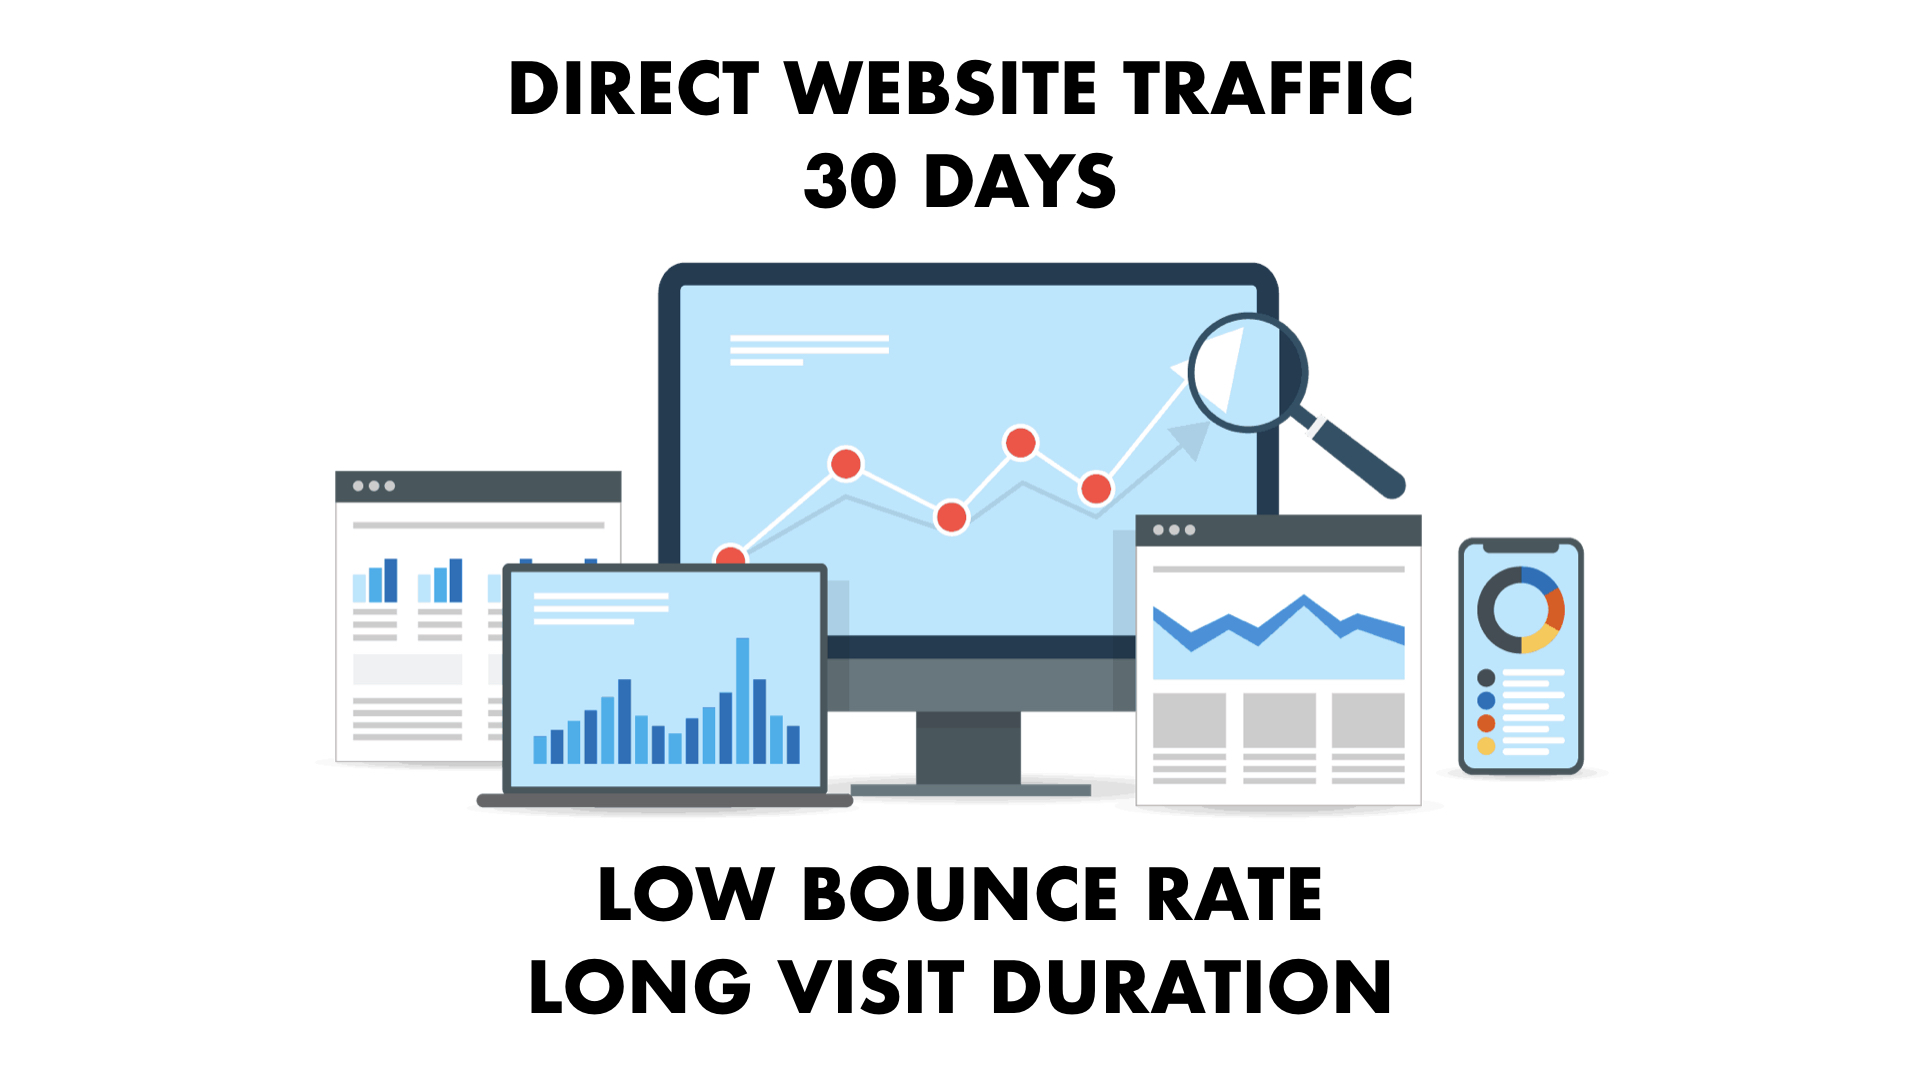 DIRECT Website Traffic with Low Bounce Rate and Long Visit Duration